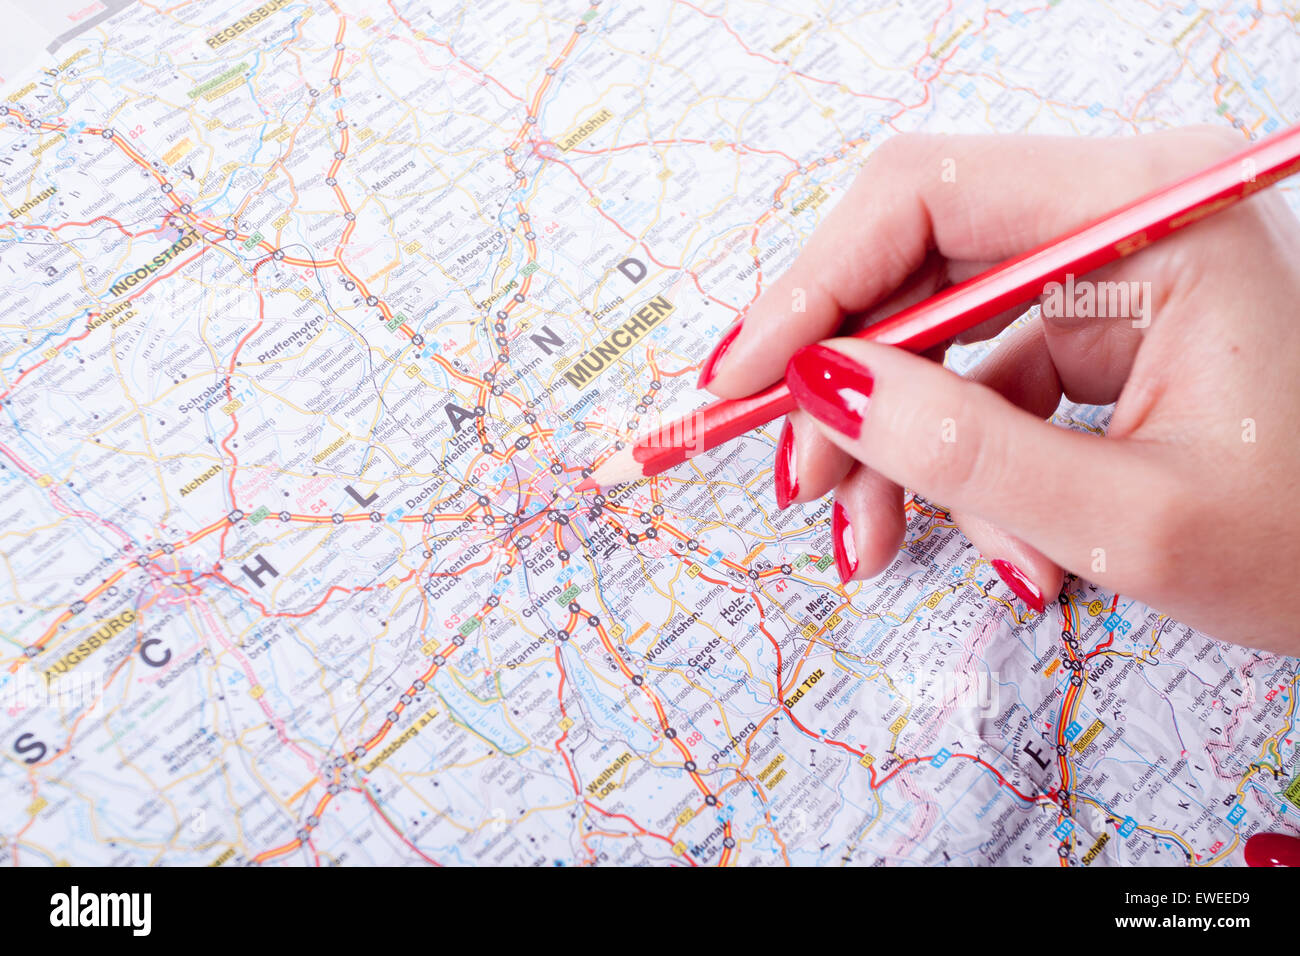 Business trip check list, woman holding red pencil Stock Photo